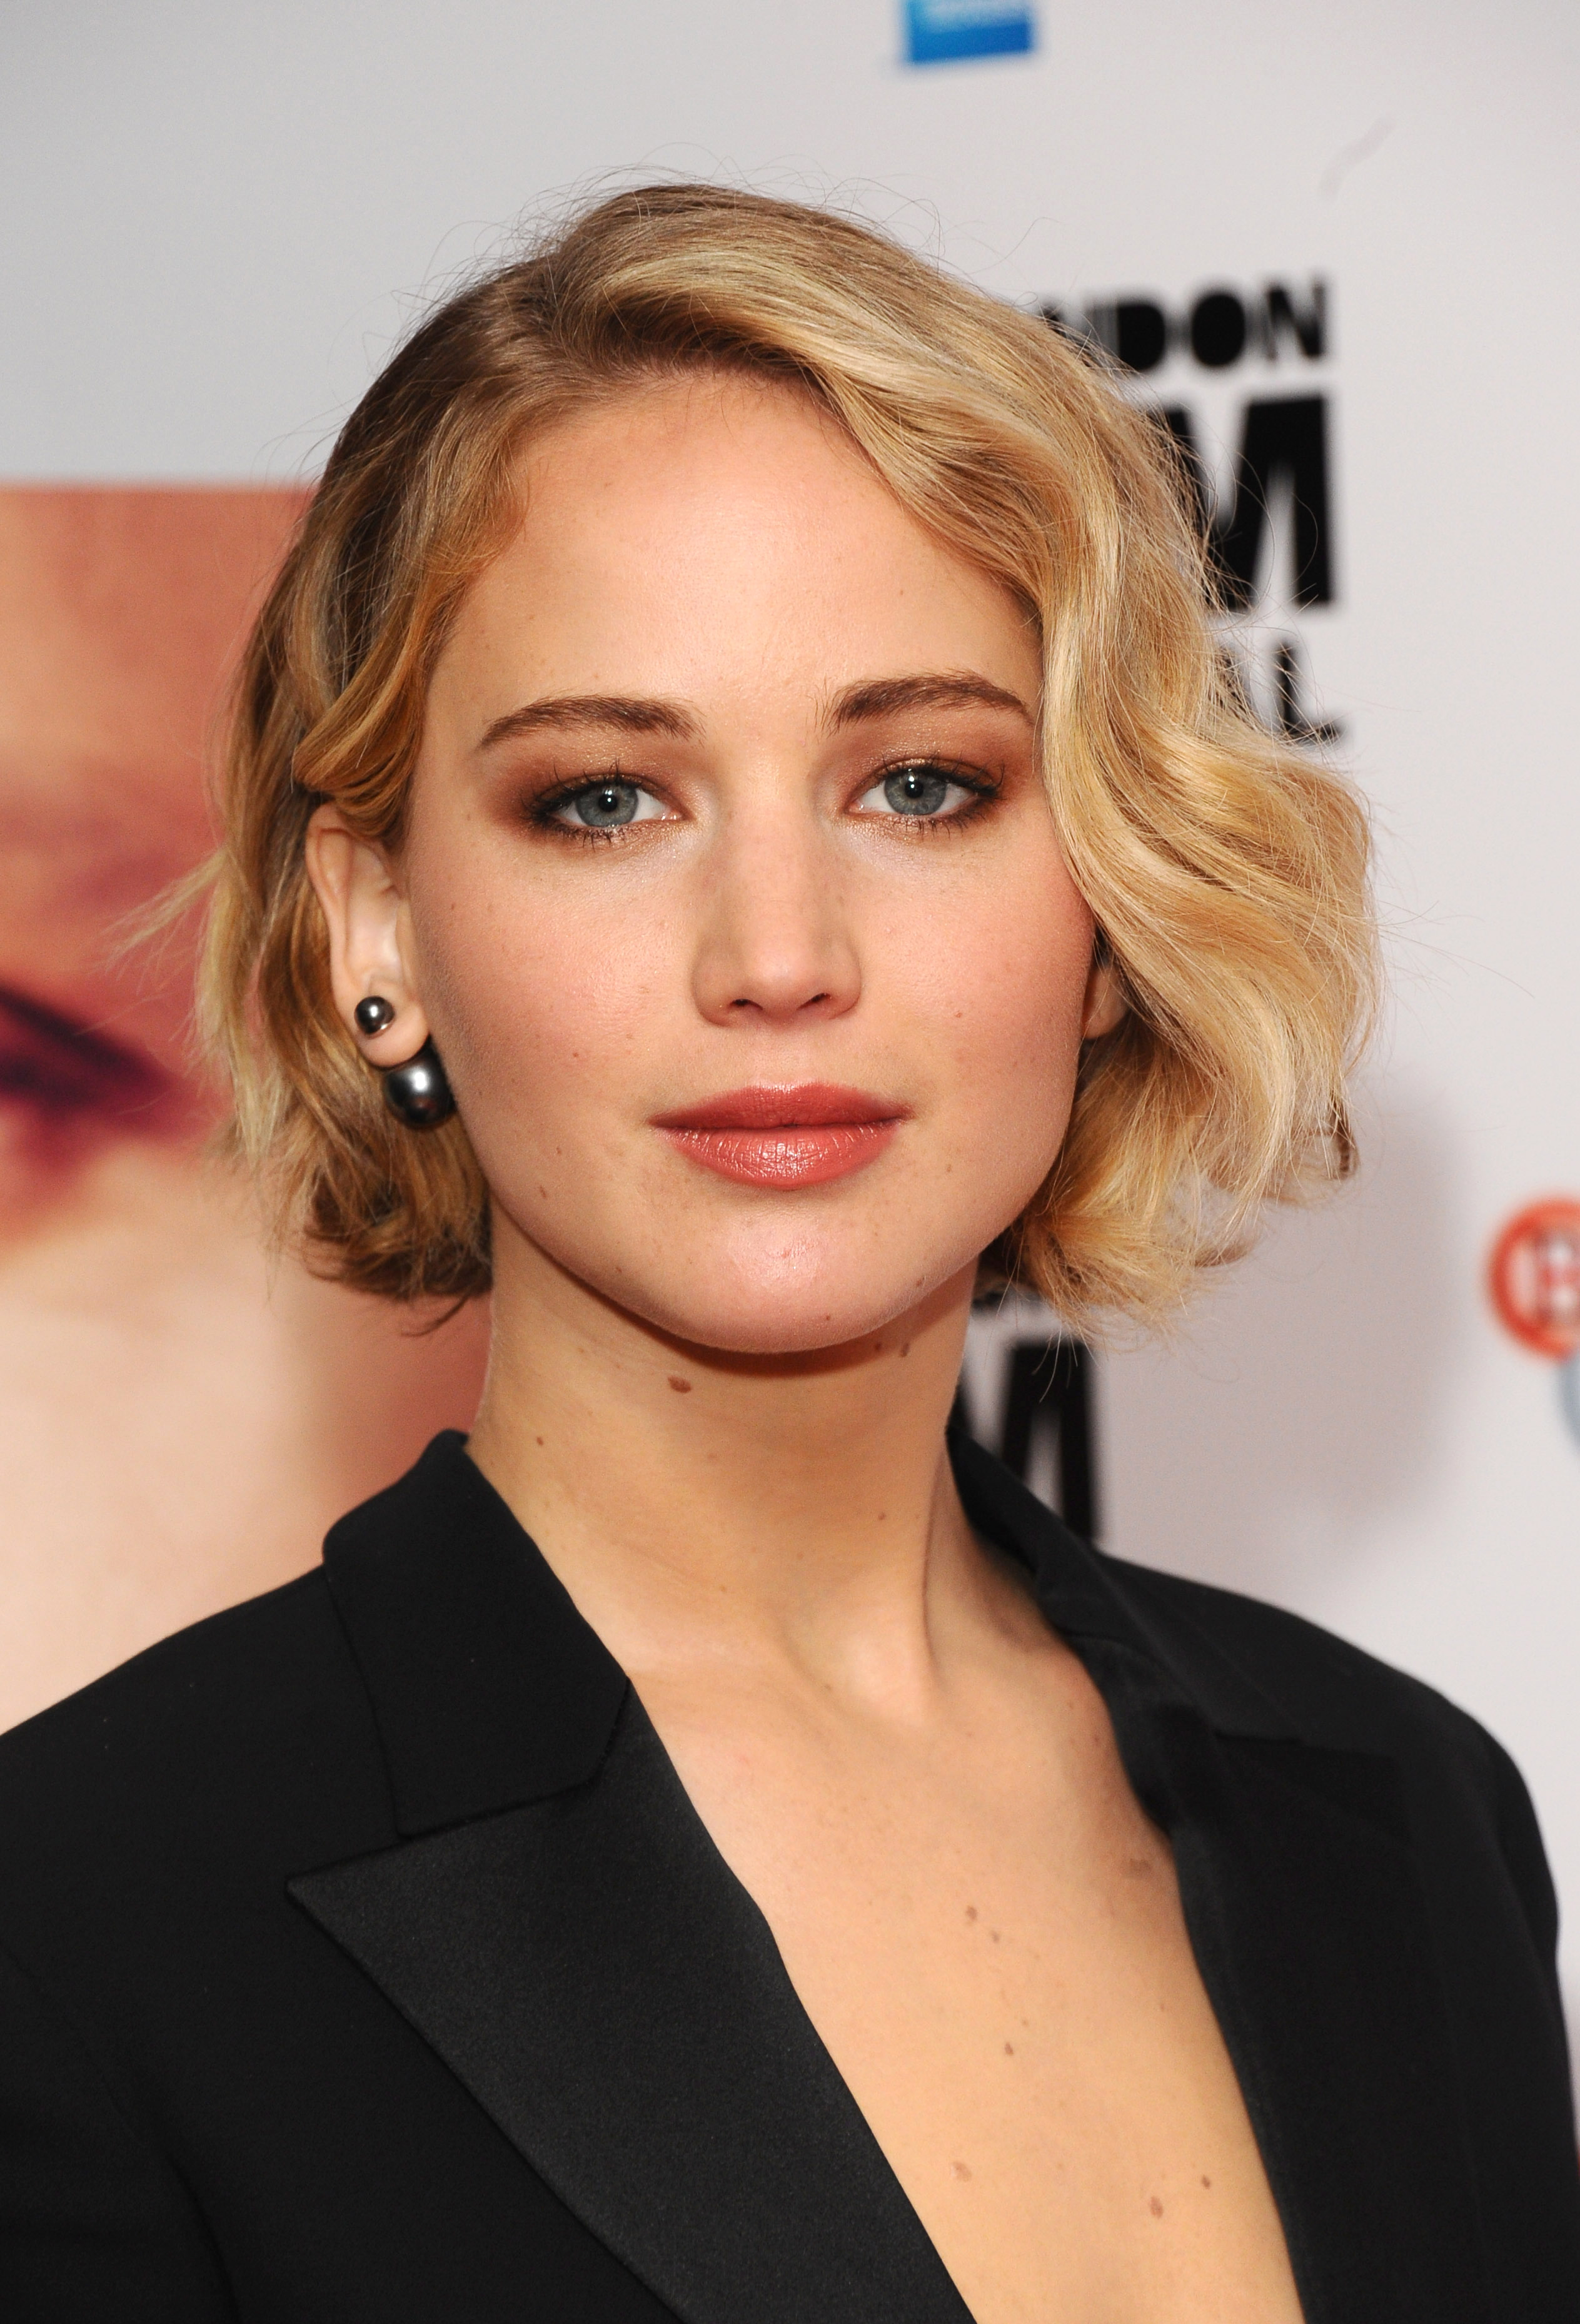 Jennifer Lawrence attends the premiere for "Serena" during the 58th BFI London Film Festival at Vue West End on October 13, 2014 in London, England. (Stuart C. Wilson&mdash;2014 Getty Images)